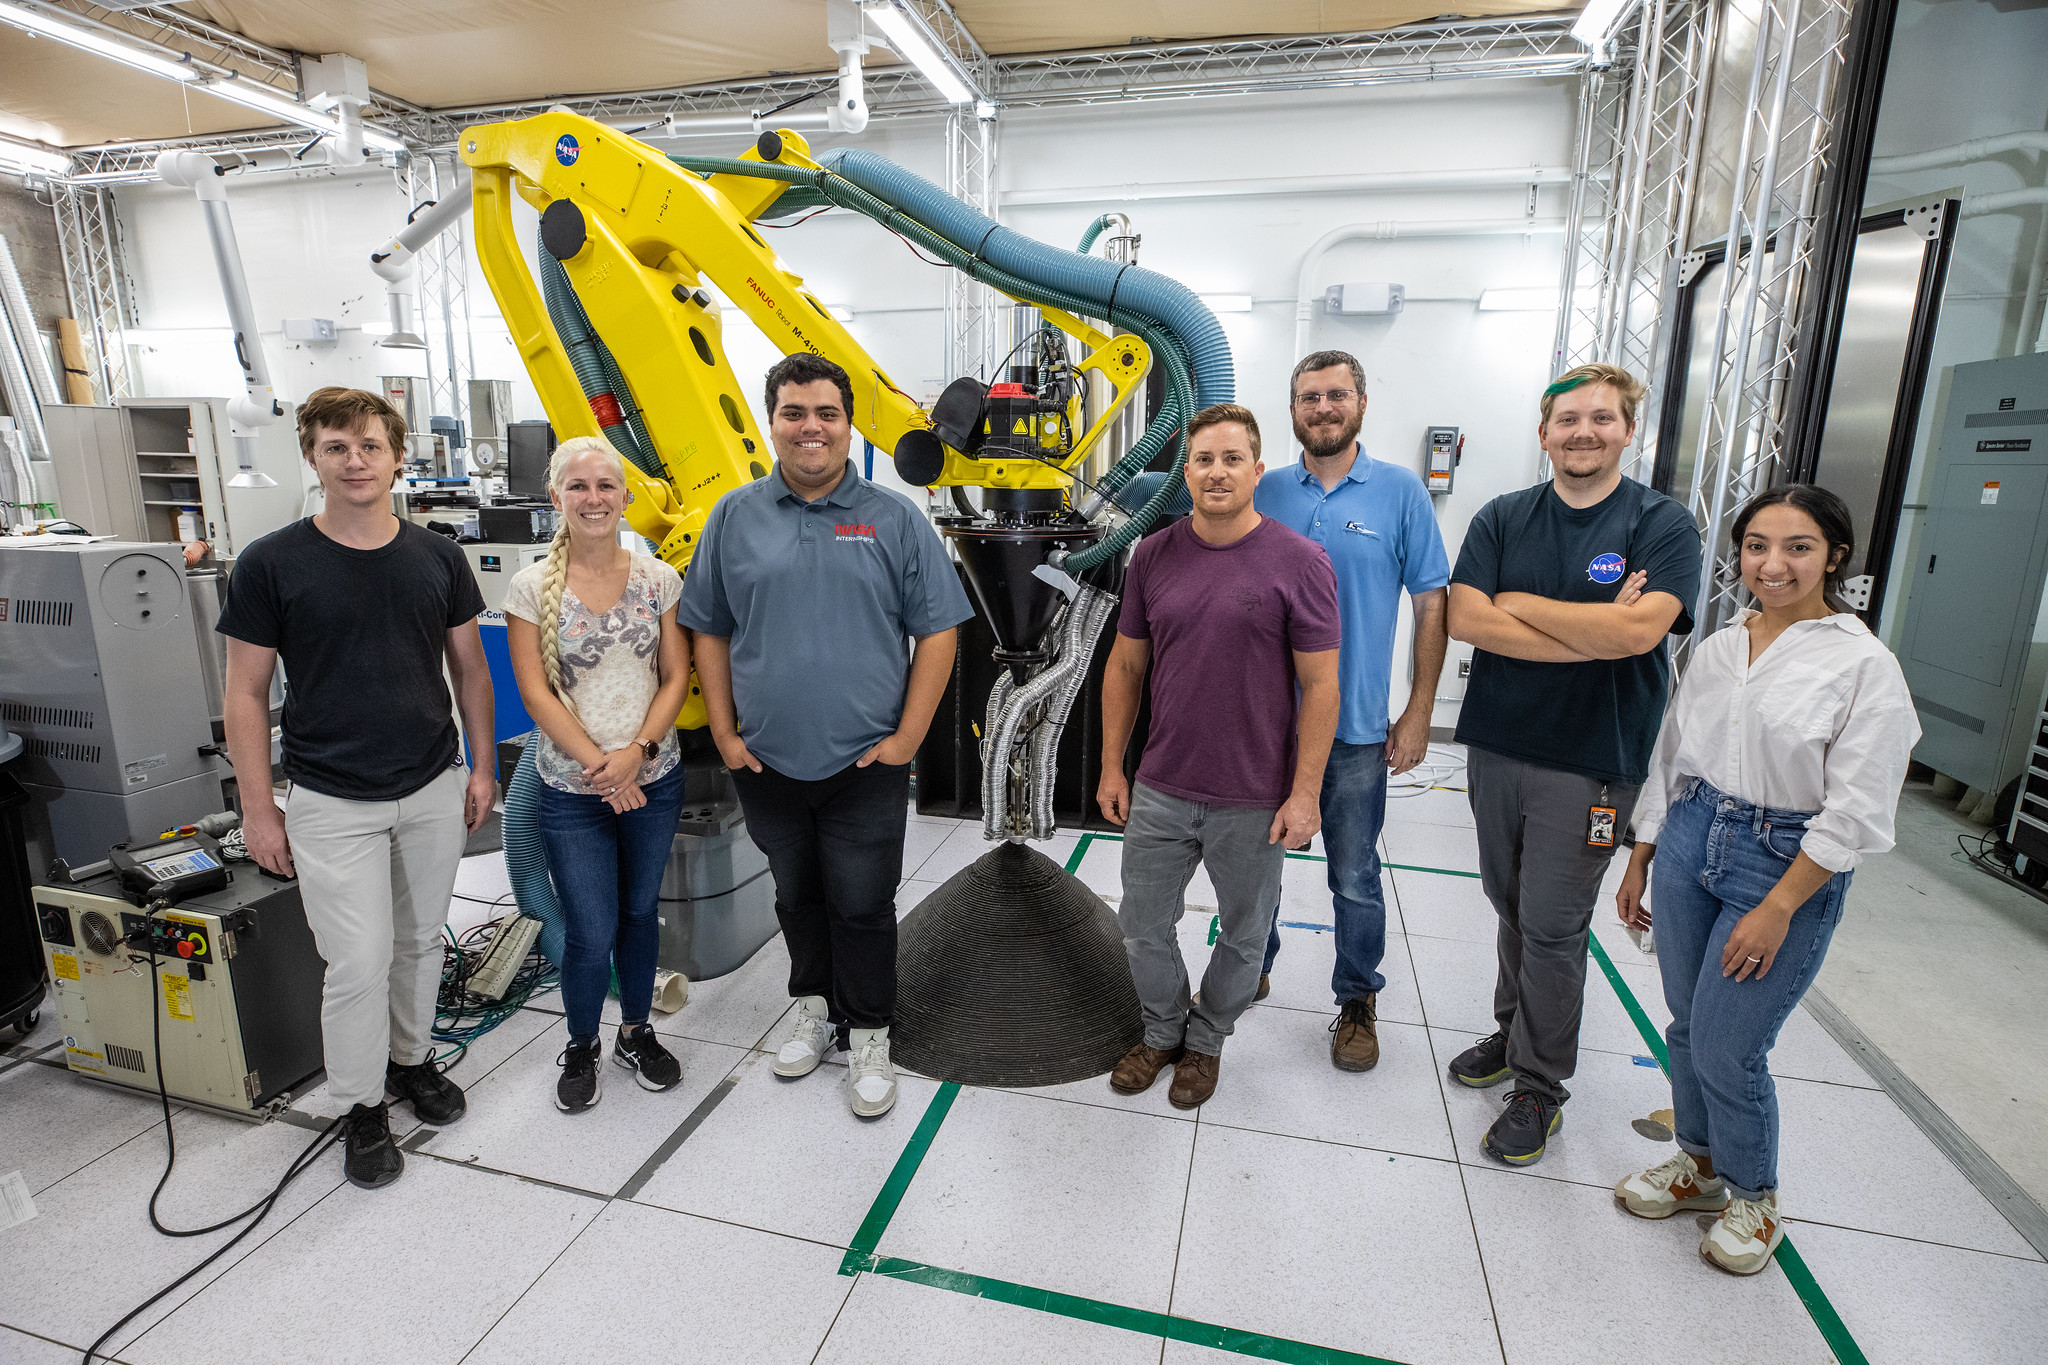 A team at NASA’s Kennedy Space Center in Florida poses with  Zero Launch Mass 3D printer on July 28, 2022, at the Florida spaceport’s Swamp Works, as part of the Relevant Environment Additive Construction Technology (REACT) project.